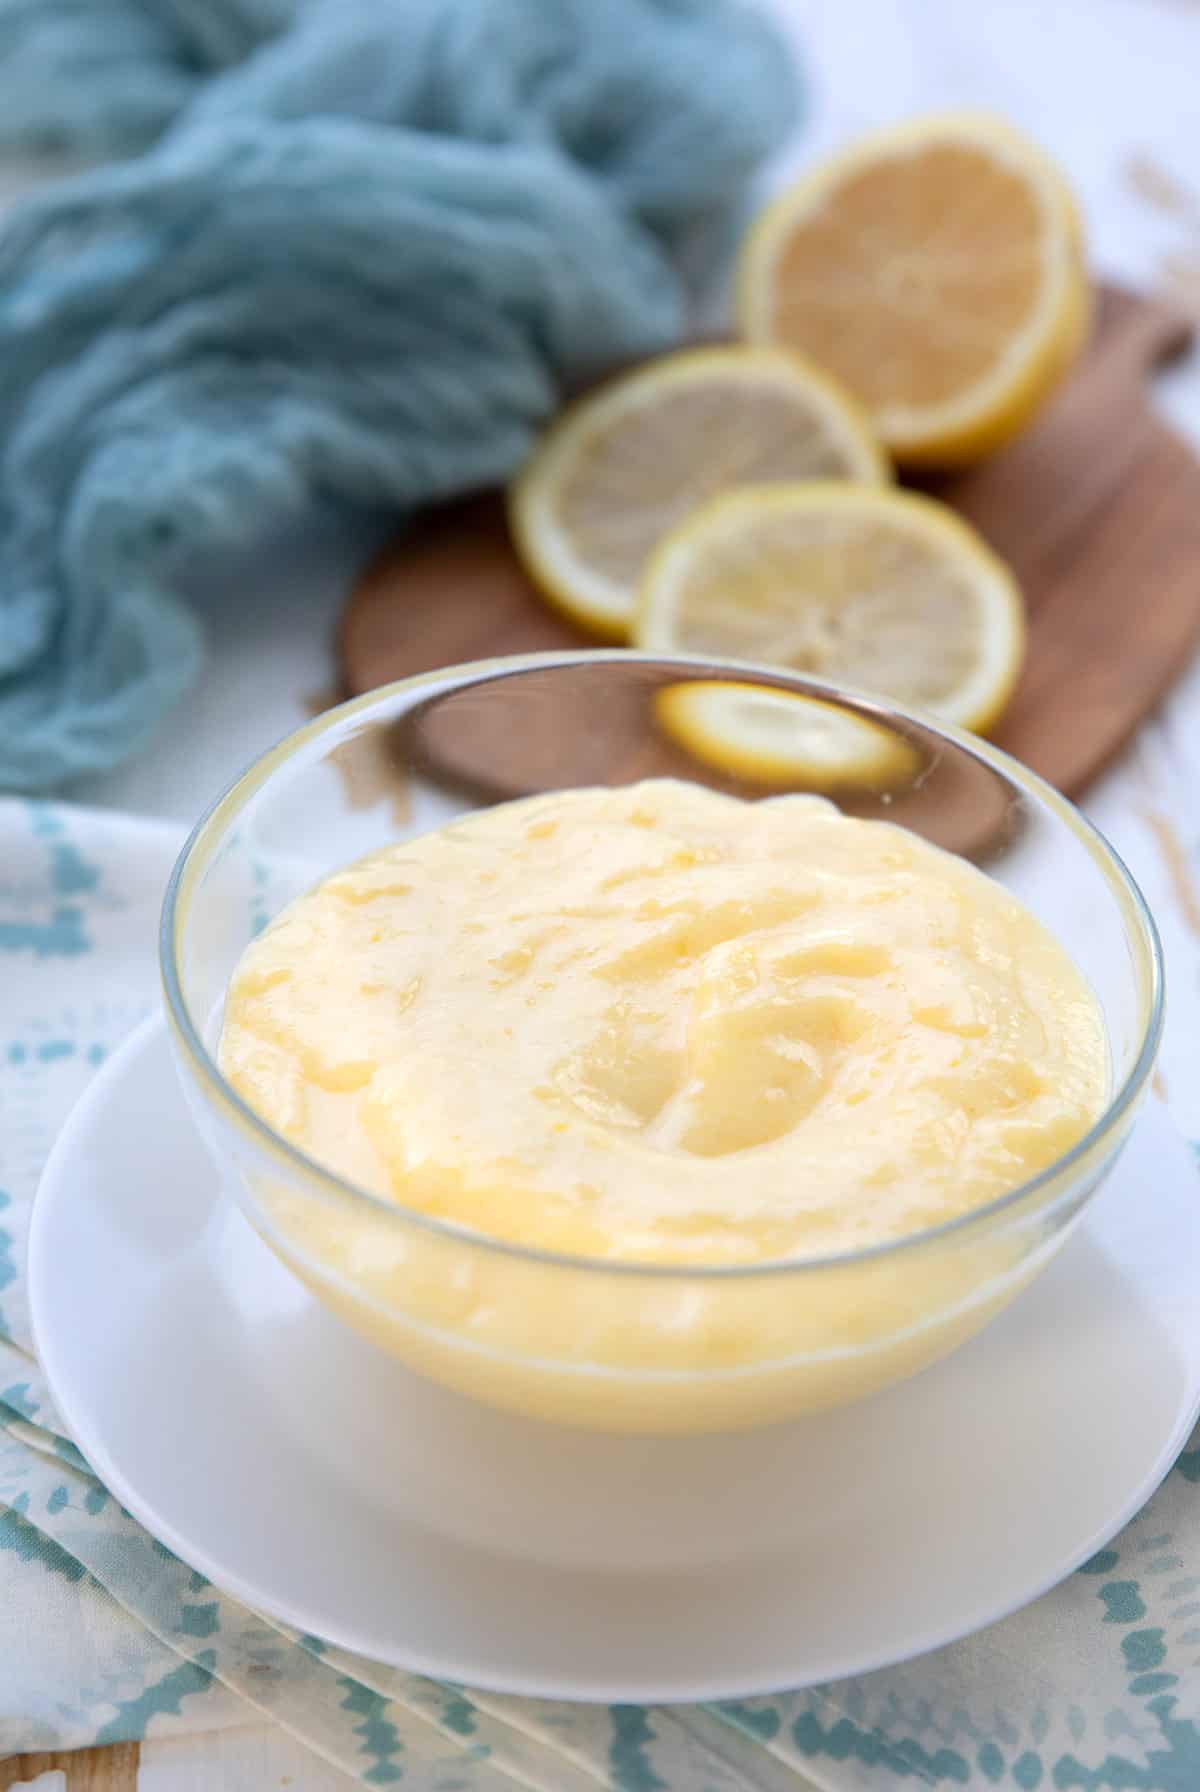 A glass bowl filled with sugar free lemon curd with sliced lemons in the background.